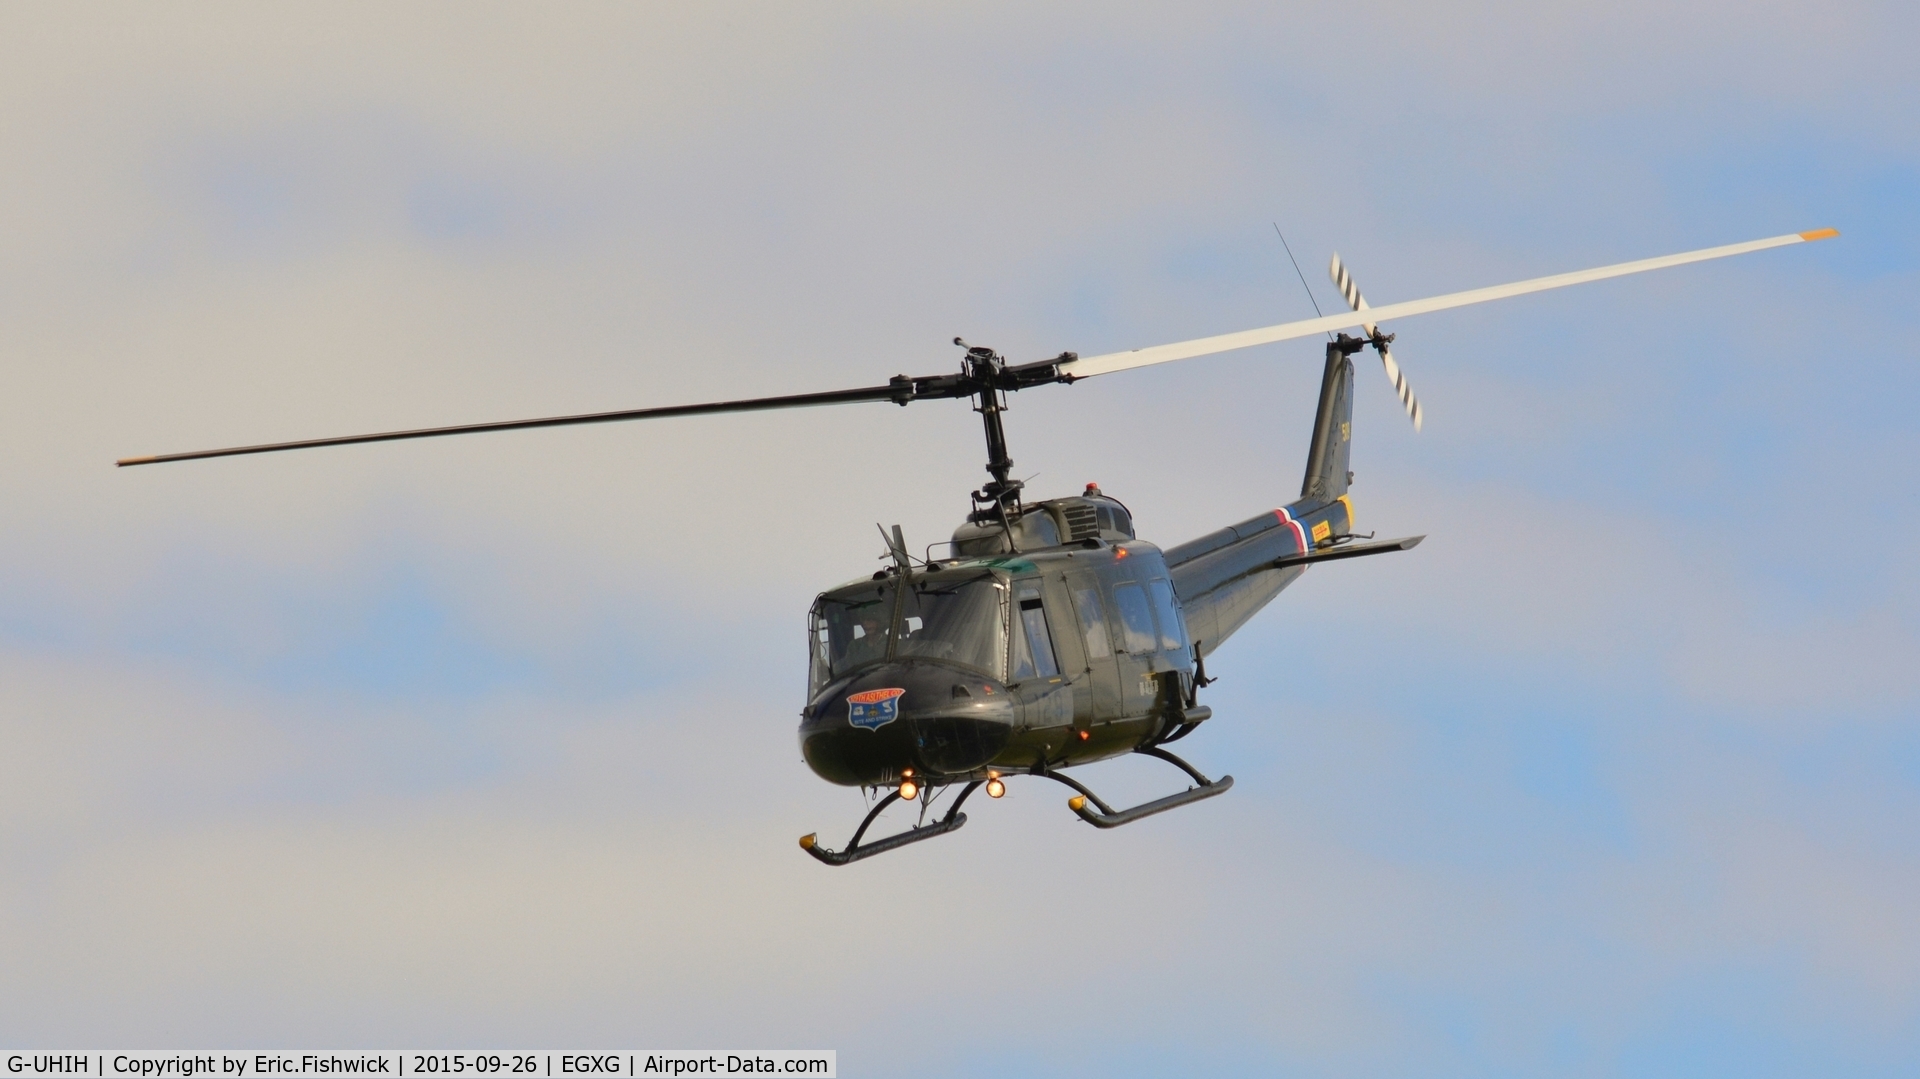 G-UHIH, 1972 Bell UH-1H Iroquois C/N 13208, 43. G-UHIH at The Yorkshire Air Show, Church Fenton, Sept. 2015.